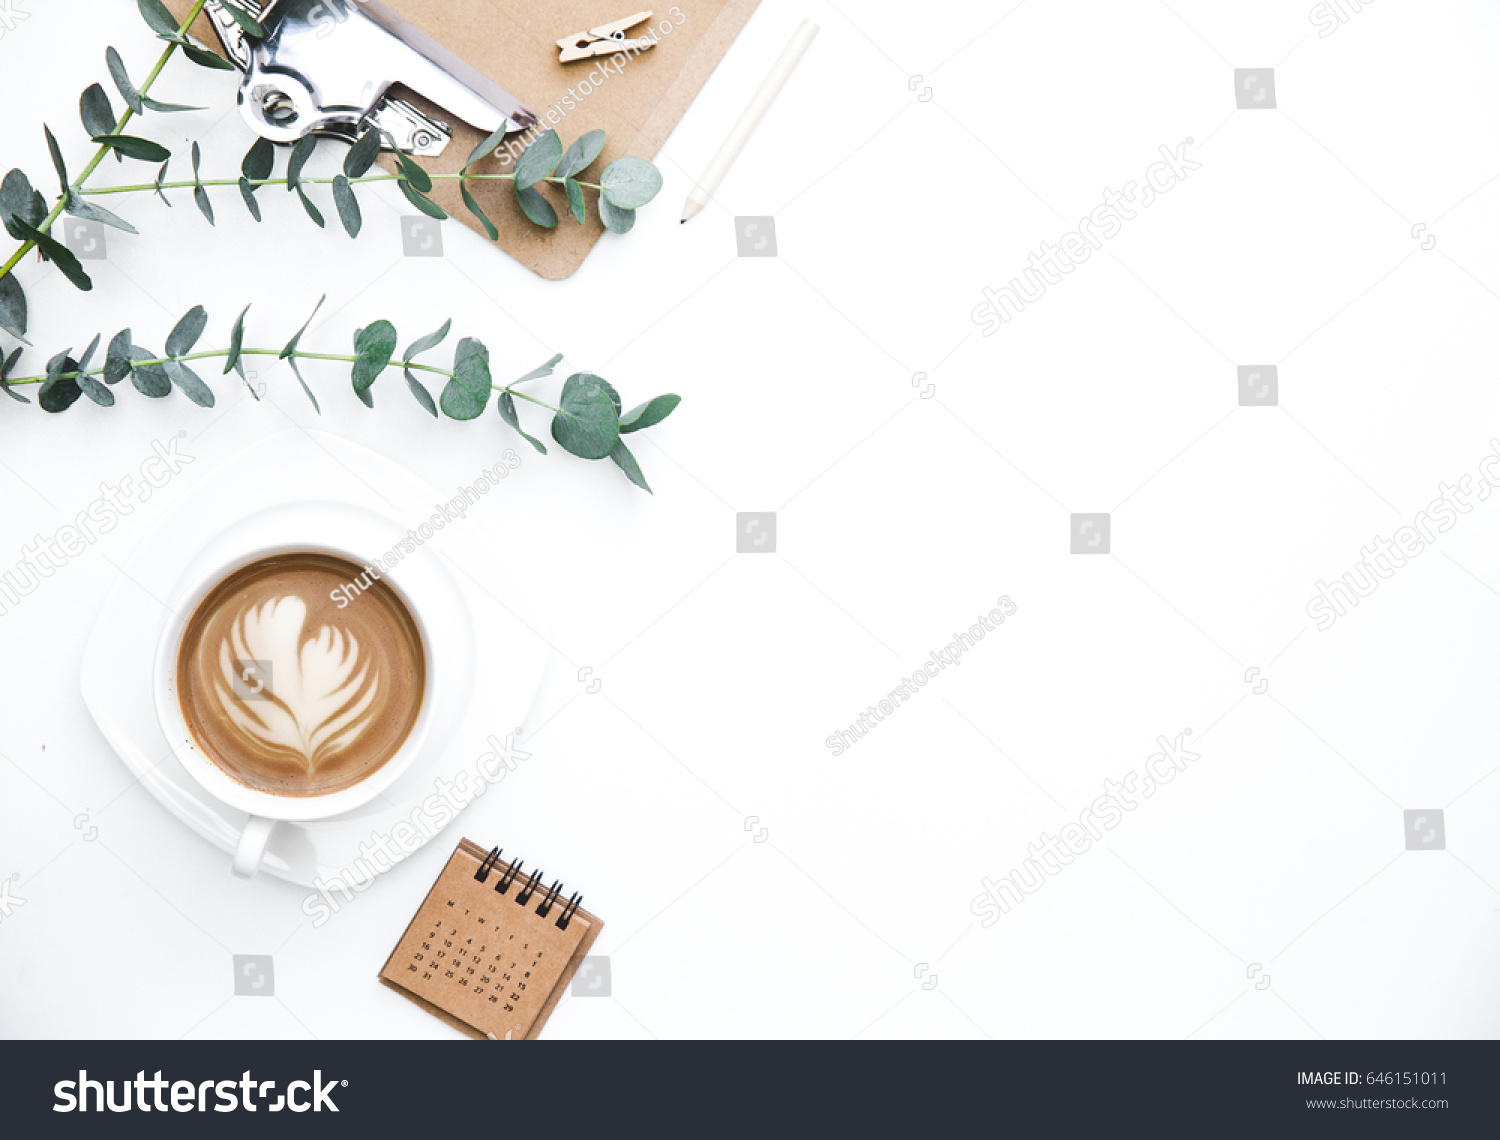 Flay lay, Top view office table desk. Feminine desk workspace frame with green leaves eucalyptus, clipboard and coffee  on white background.  ideas, notes or plan writing concept #646151011